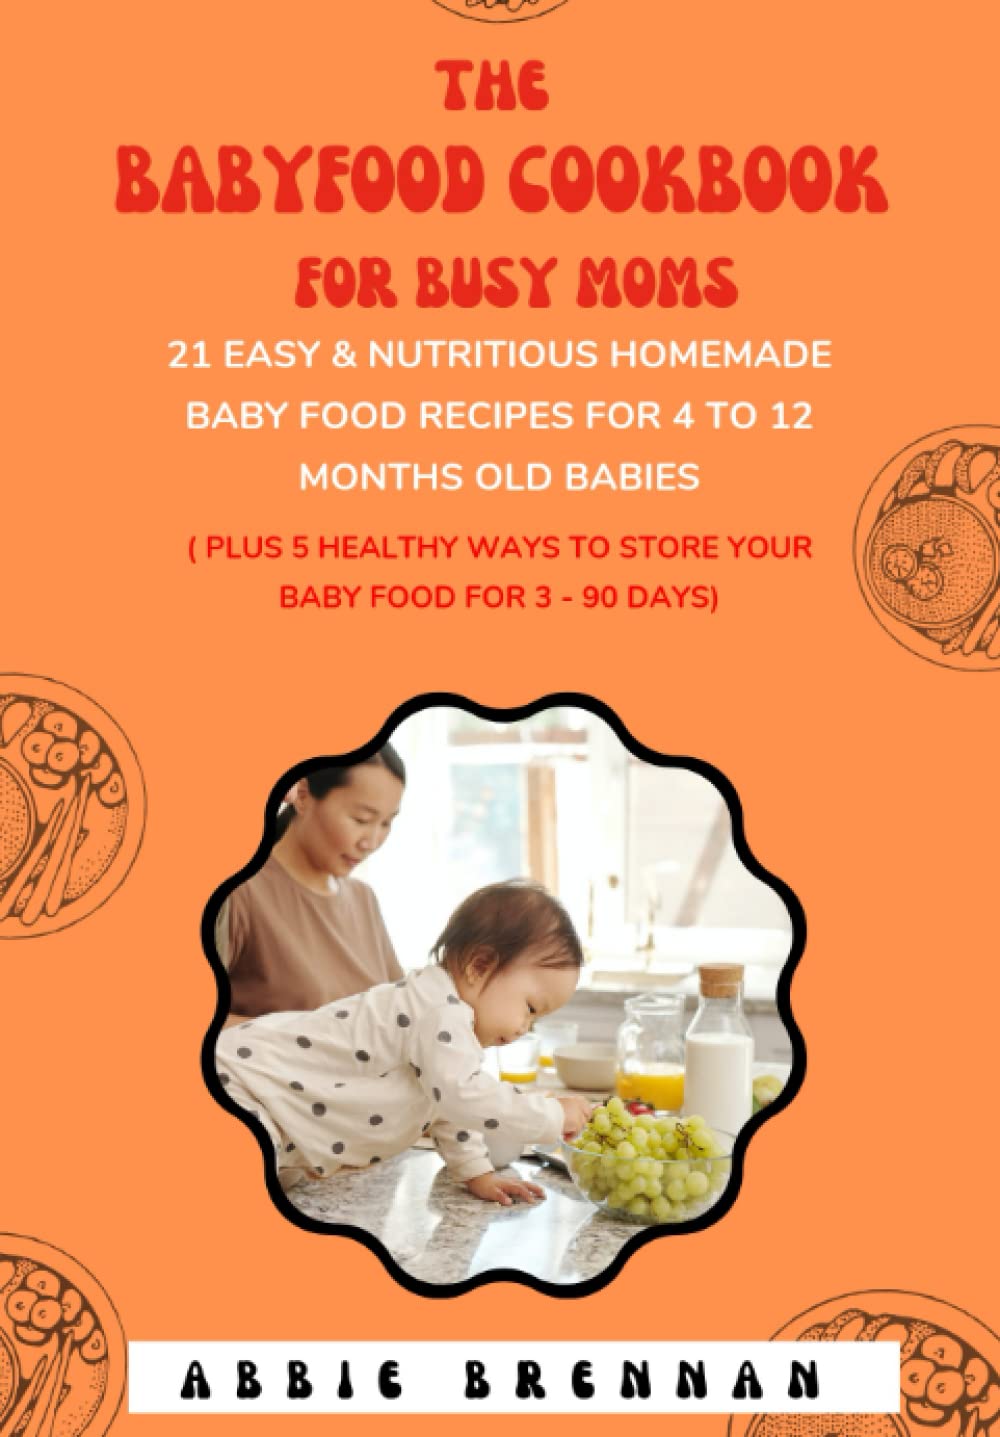 The Baby Food Cookbook For Busy Moms: 21 Easy & Nutritious Homemade Baby Food Recipes For 4 To 12 Months Old Babies (Plus Ways To Store Your Baby Food For 3 – 90 Days)